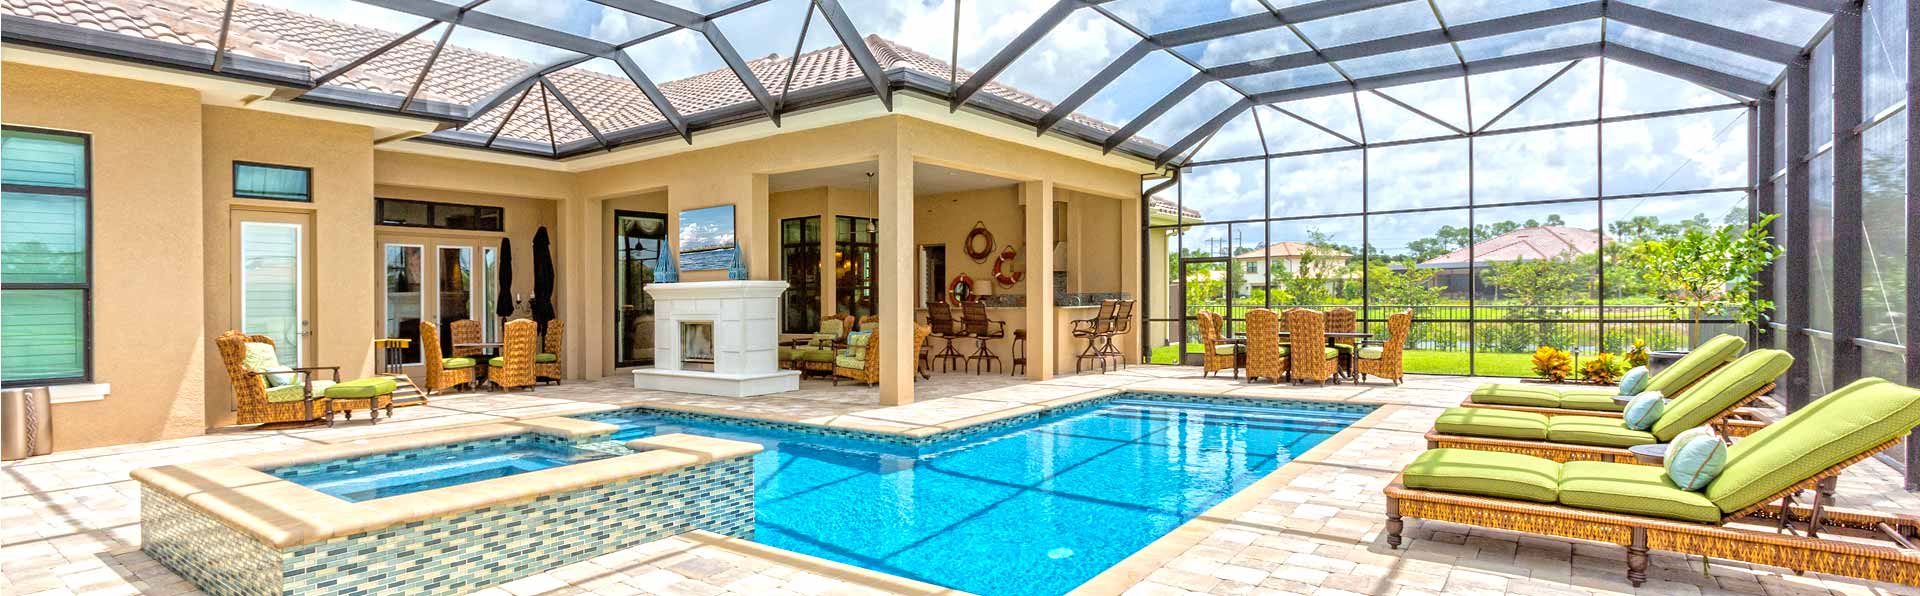 pool and spa in a screen-in lanai area